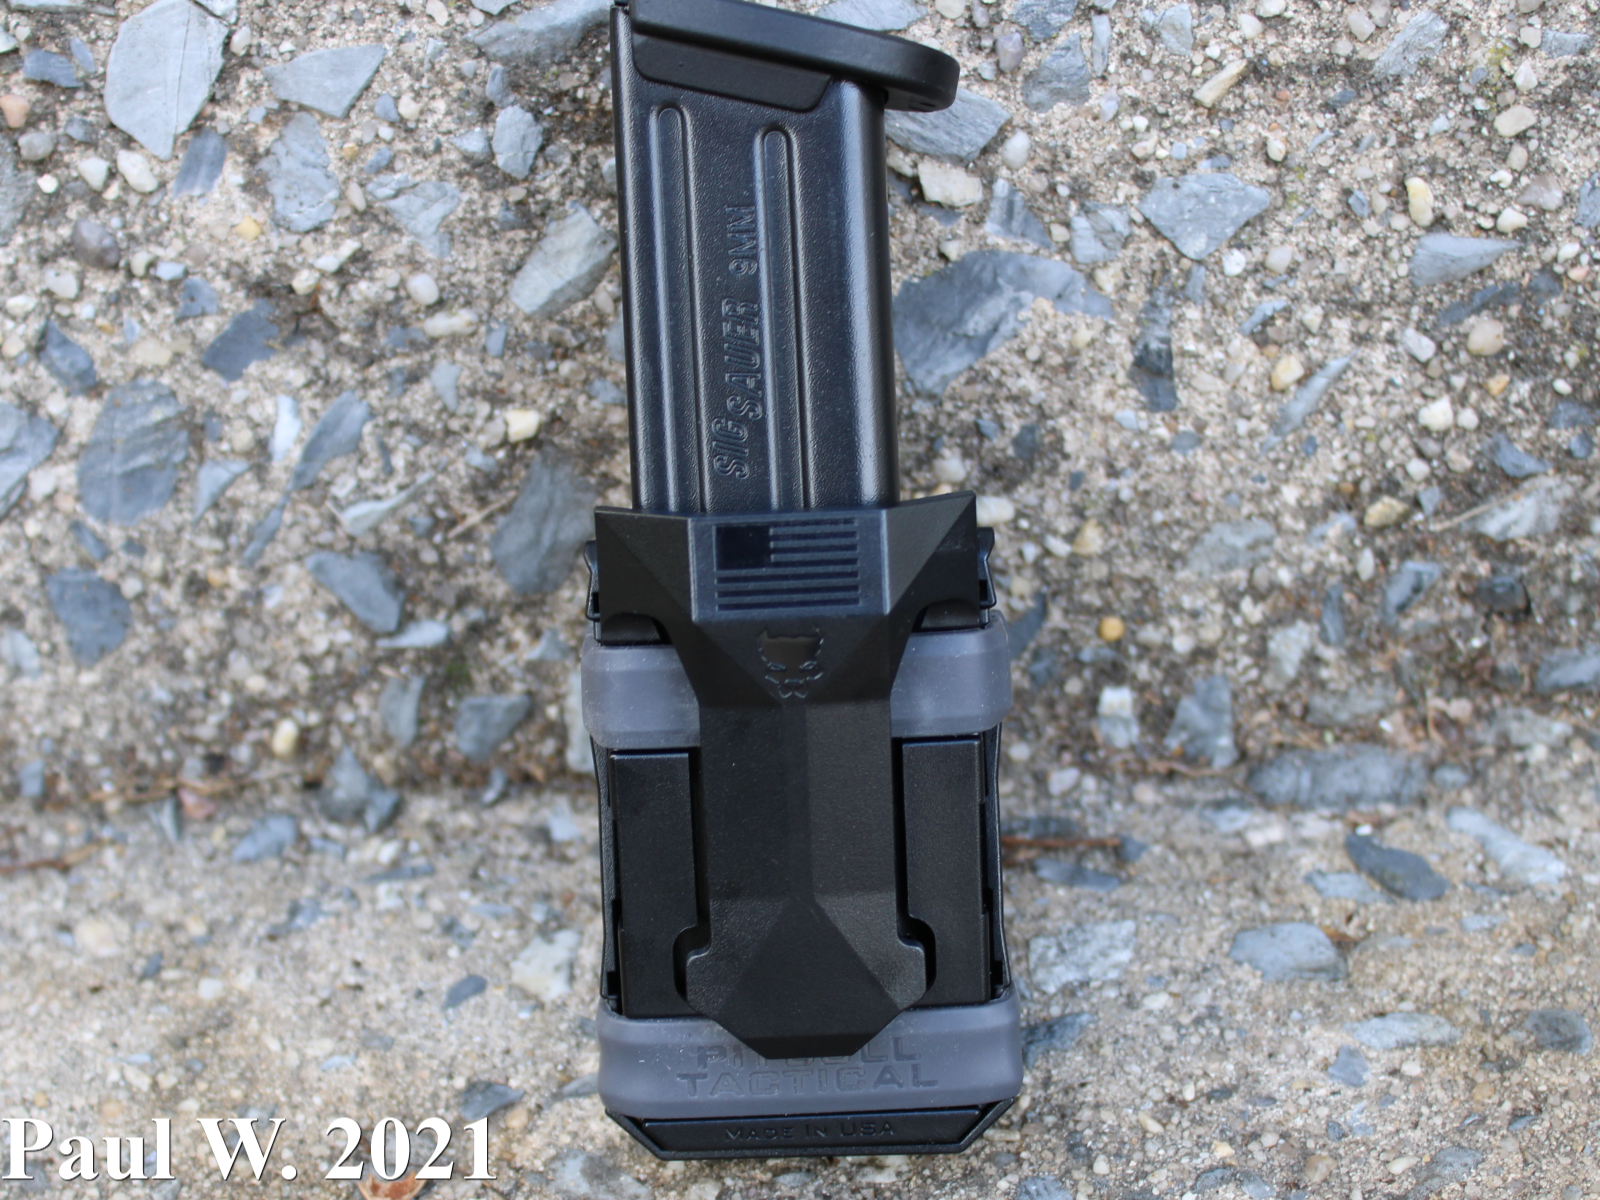 Pitbull Tactical Universal Magazine Carrier Clip